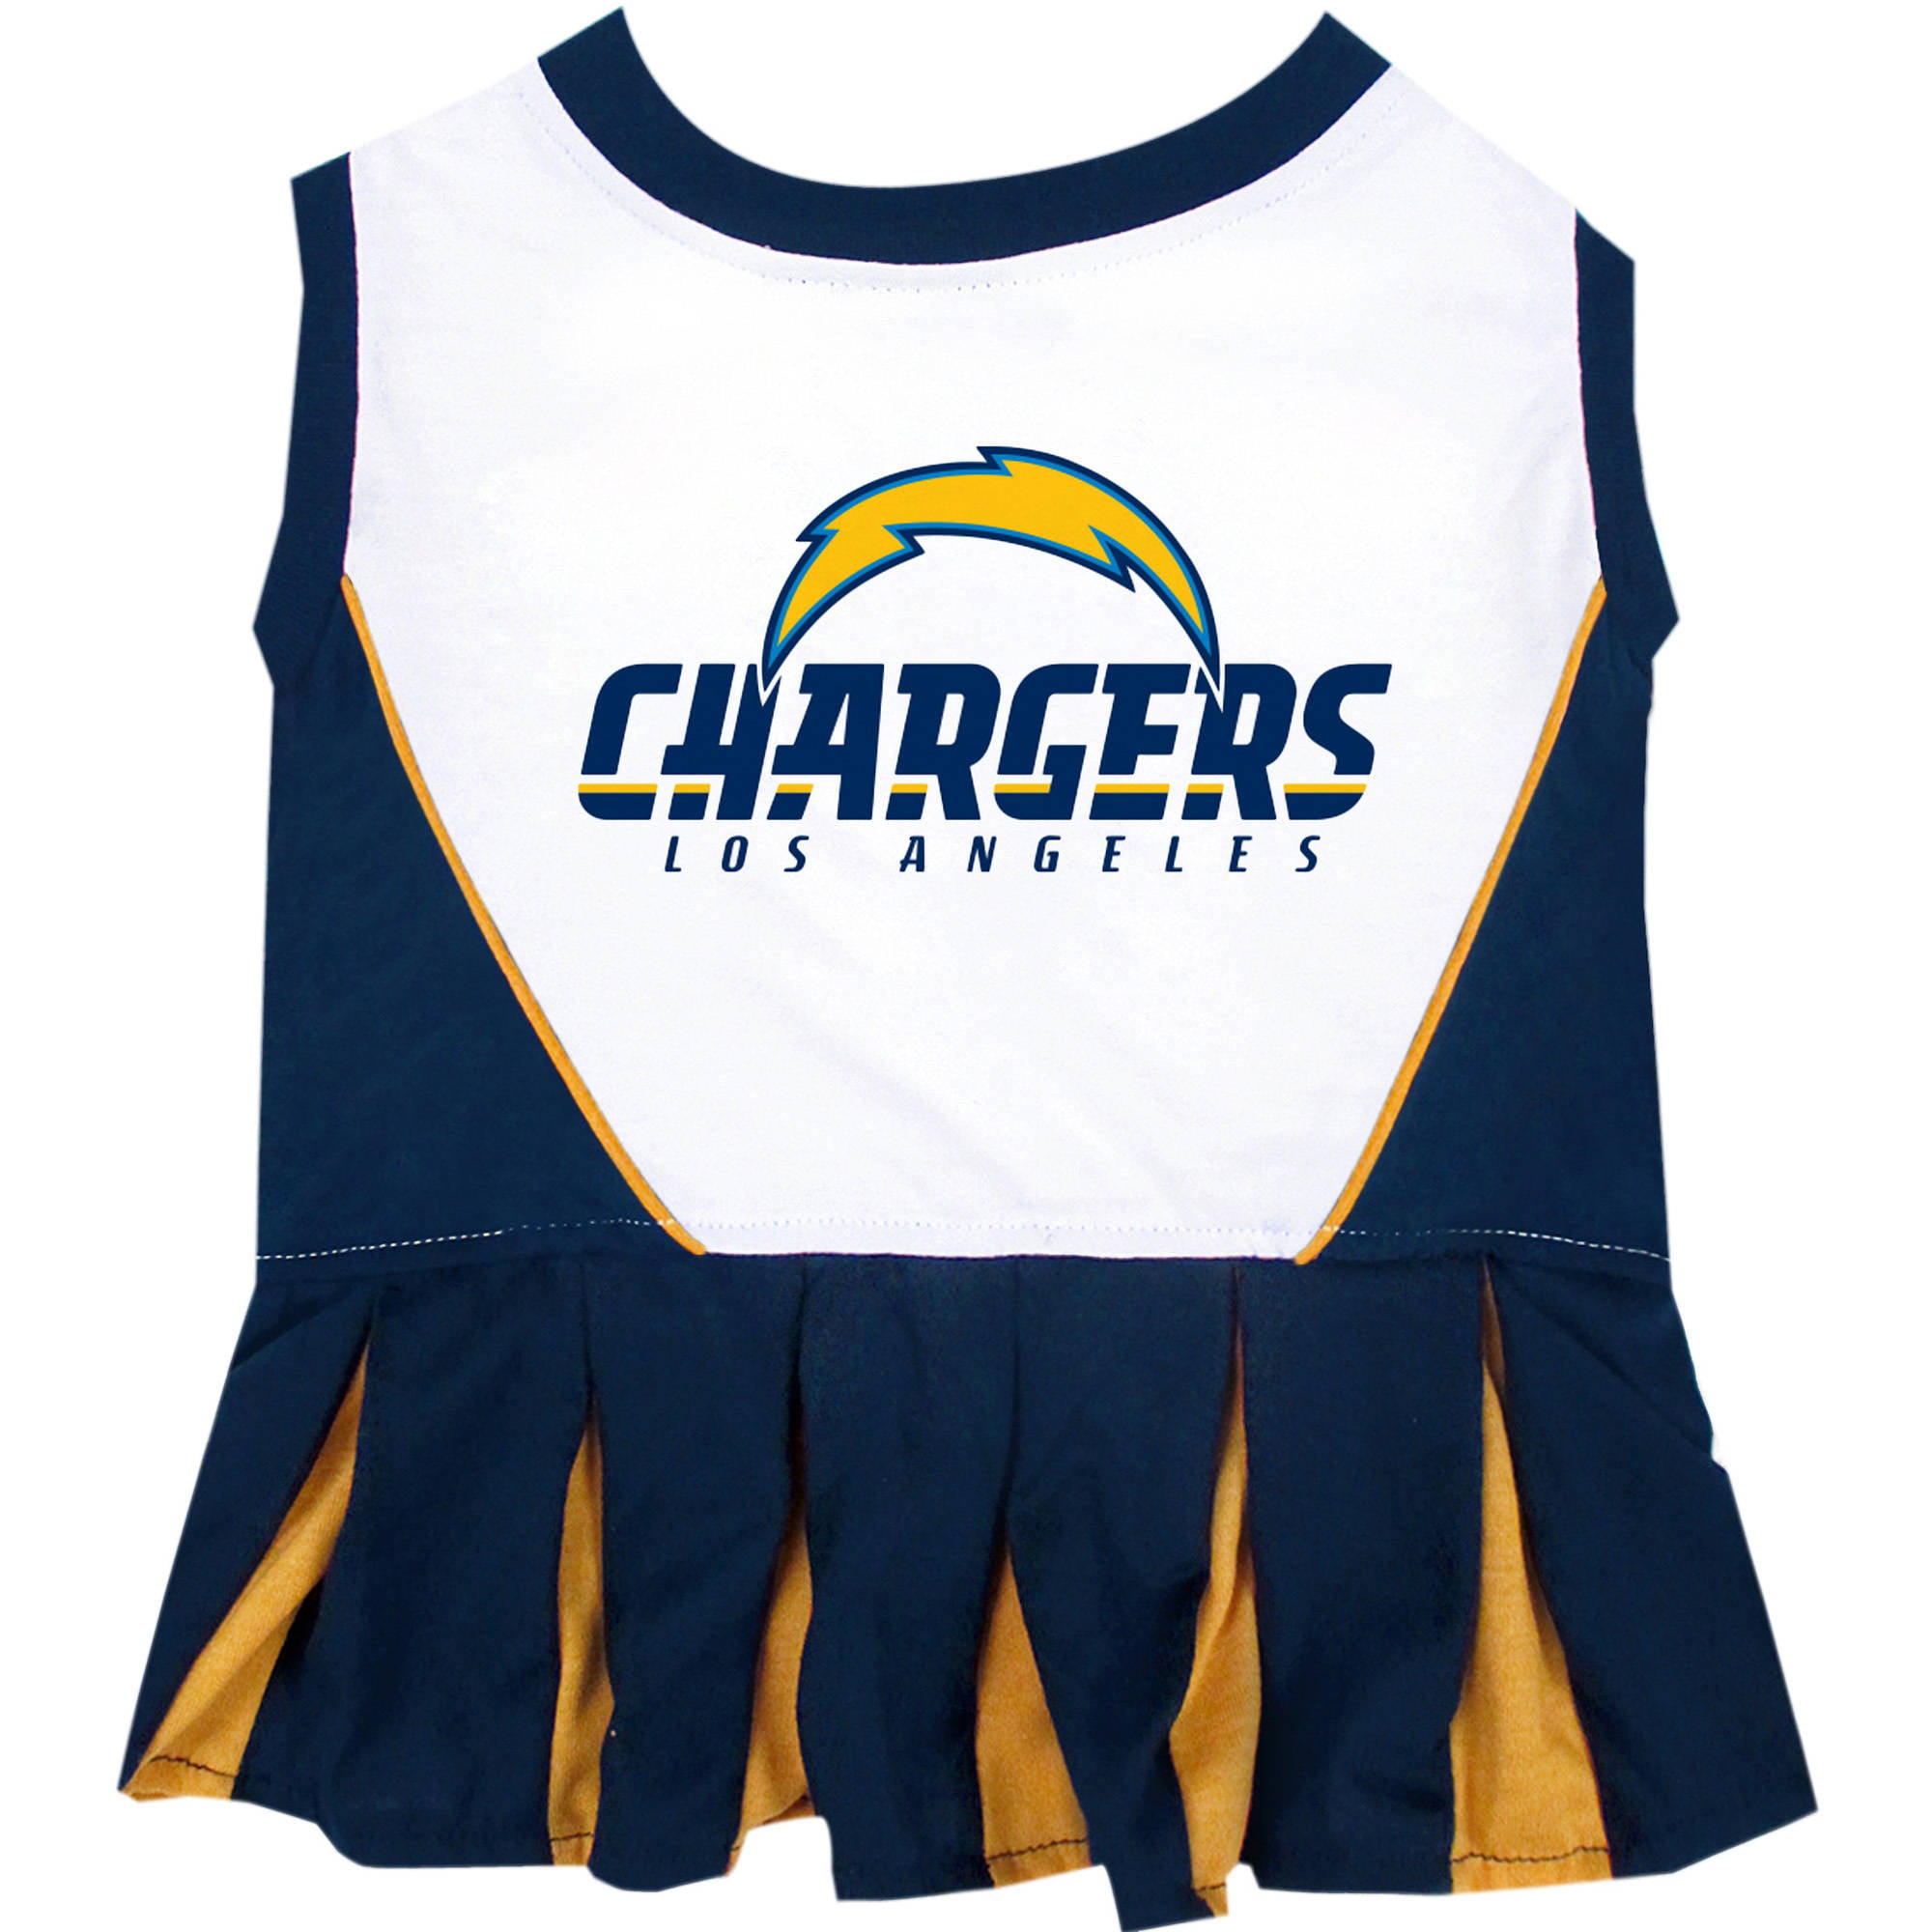 sleeveless chargers jersey